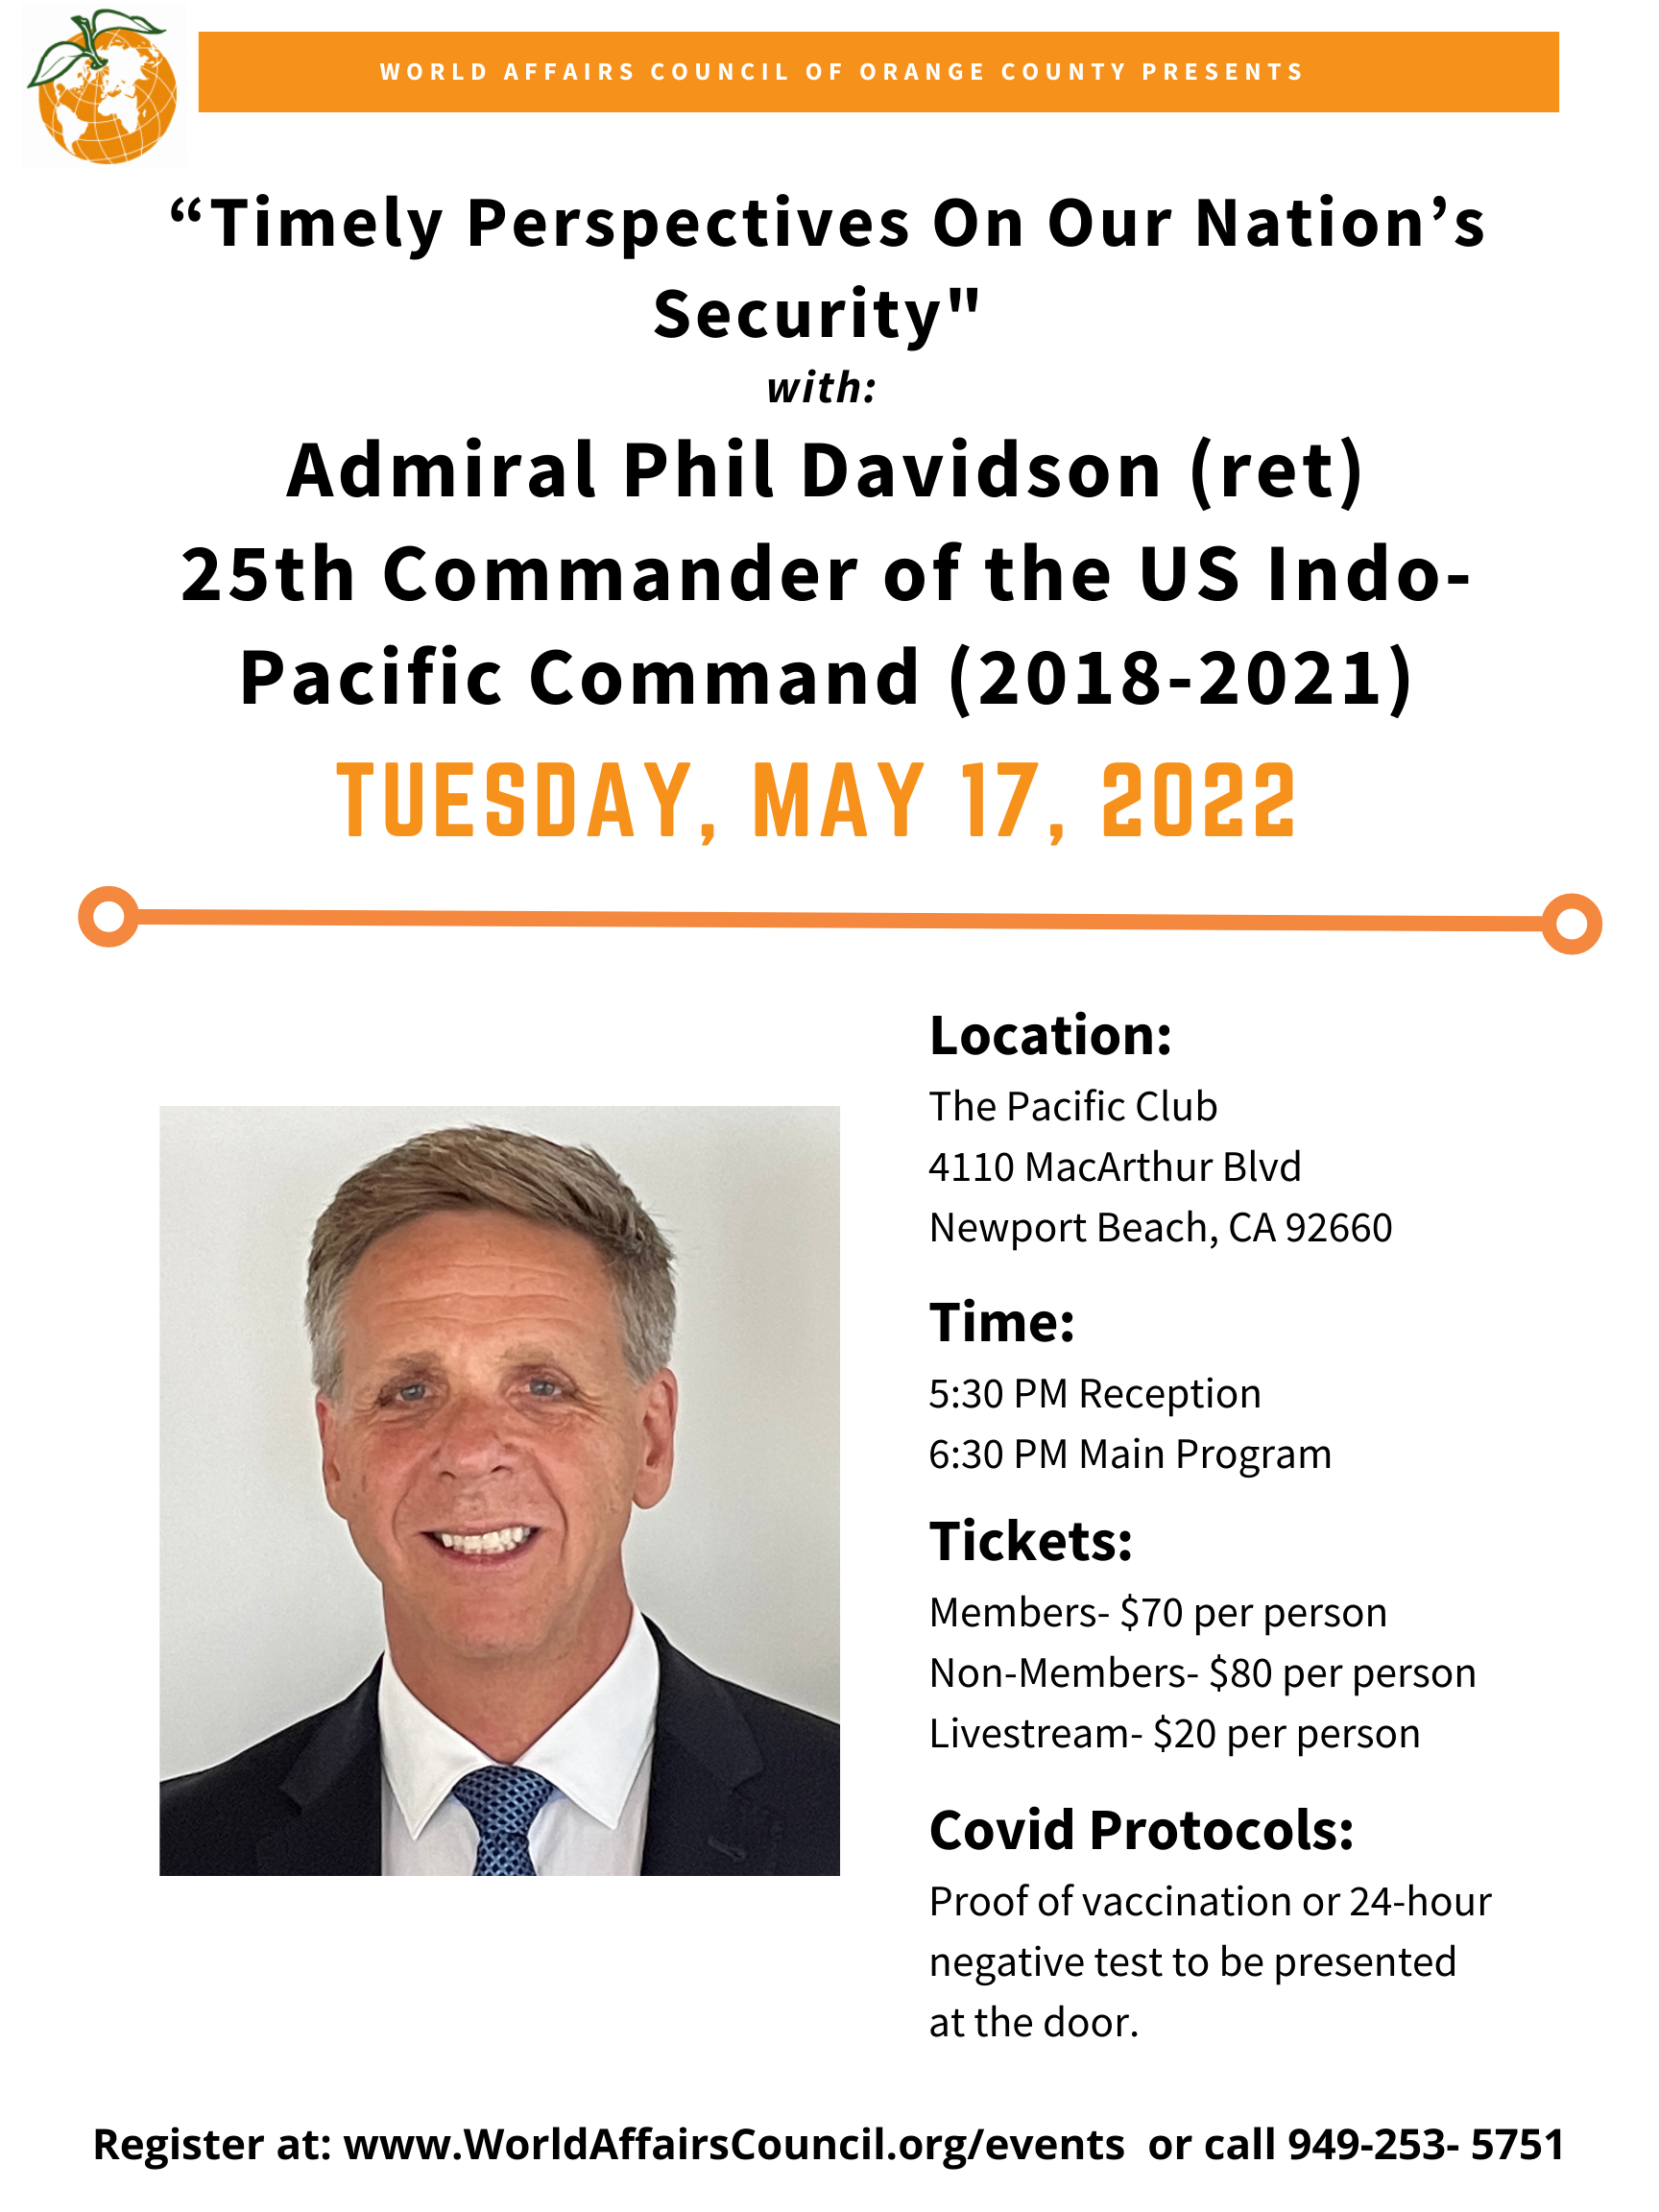 “Timely Perspectives On Our Nation’s Security" with Admiral Phil Davidson (ret) 25th Commander of the US Indo-Pacific Command (2018-2021)